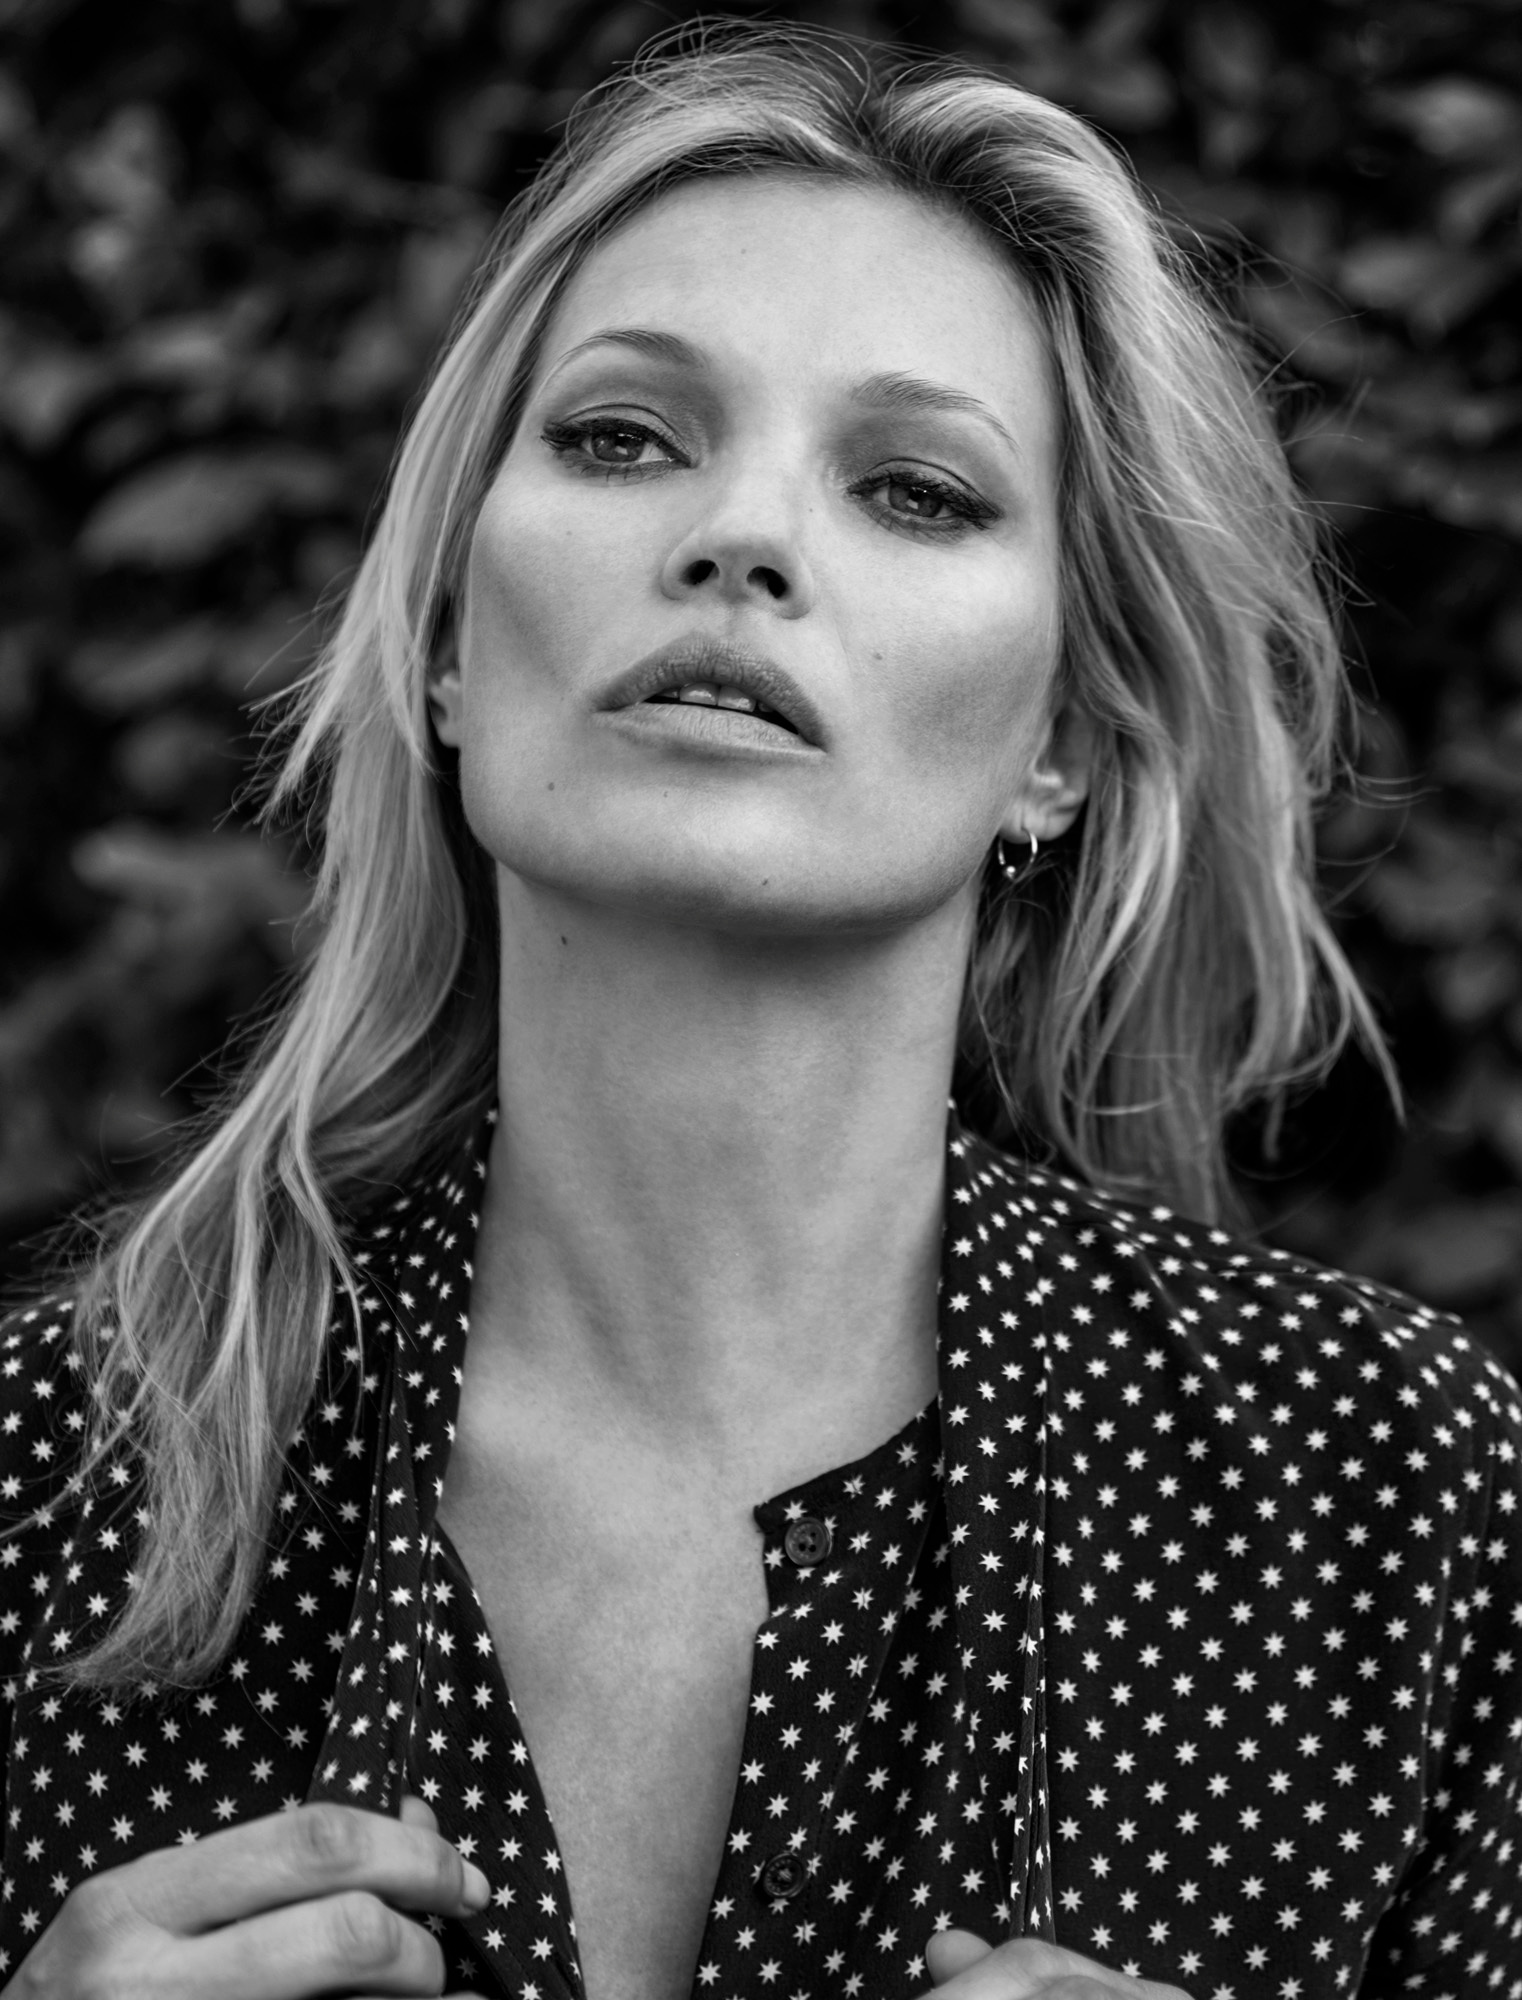 kate-moss-by-chris-colls-for-the-edit-june-2016-8.jpg